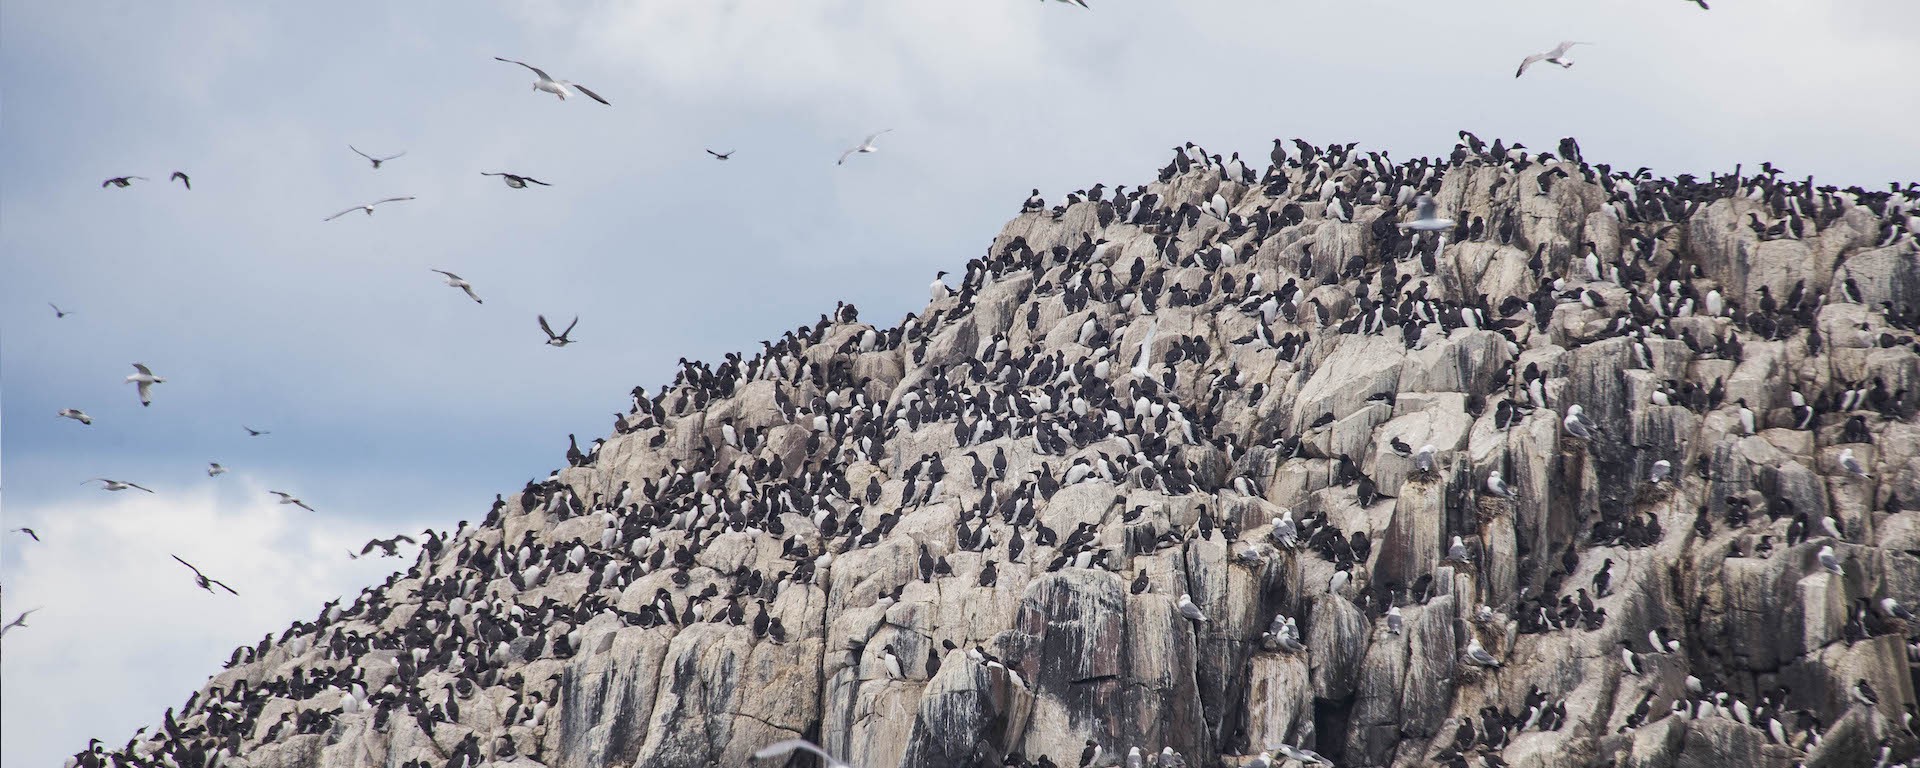 Outcropping covered in birds